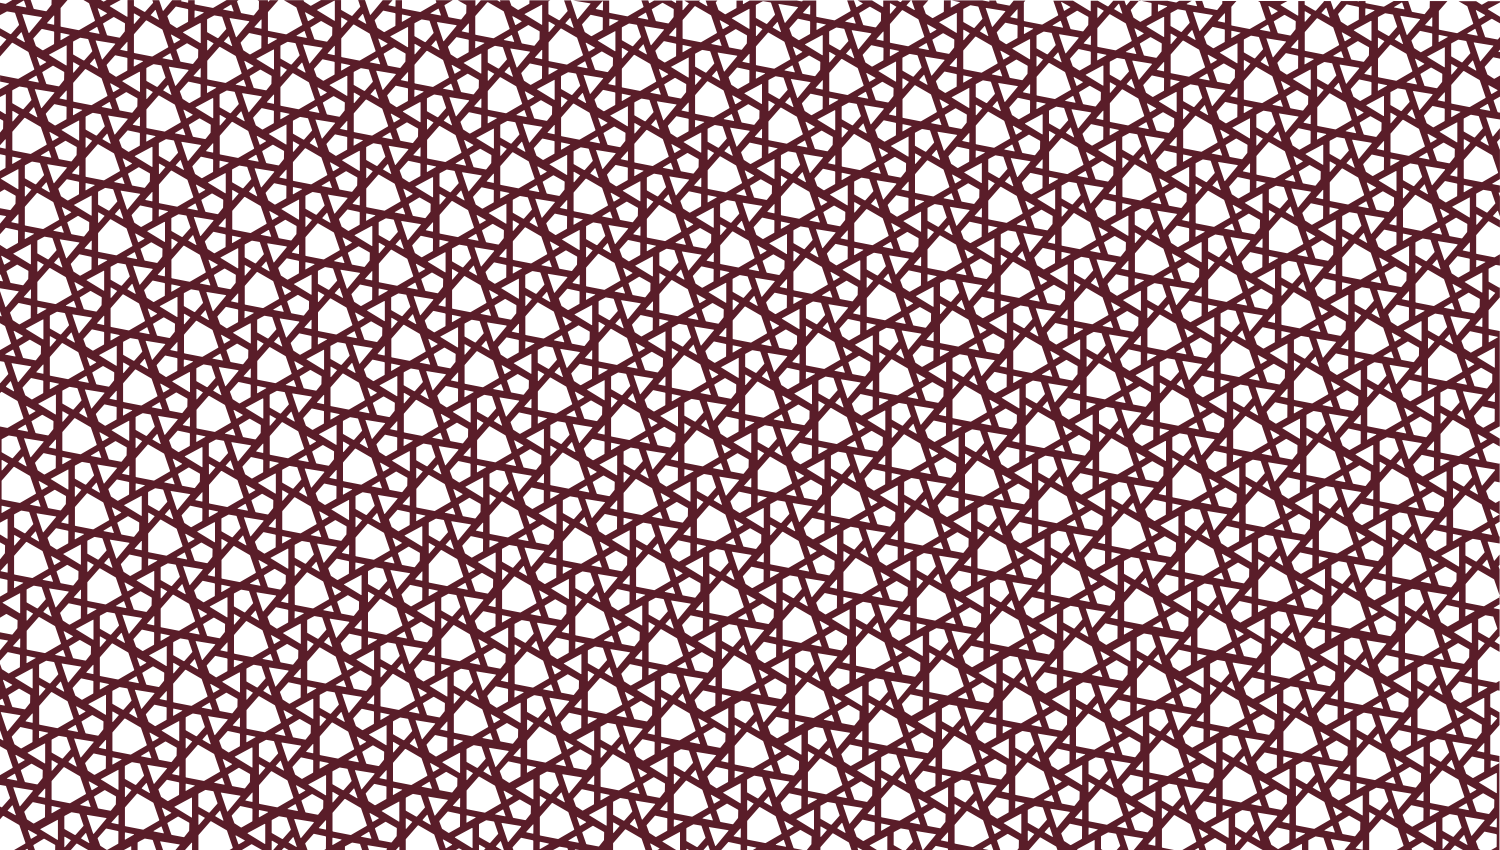 Parasoleil™ Dora© pattern displayed with a burgundy color overlay